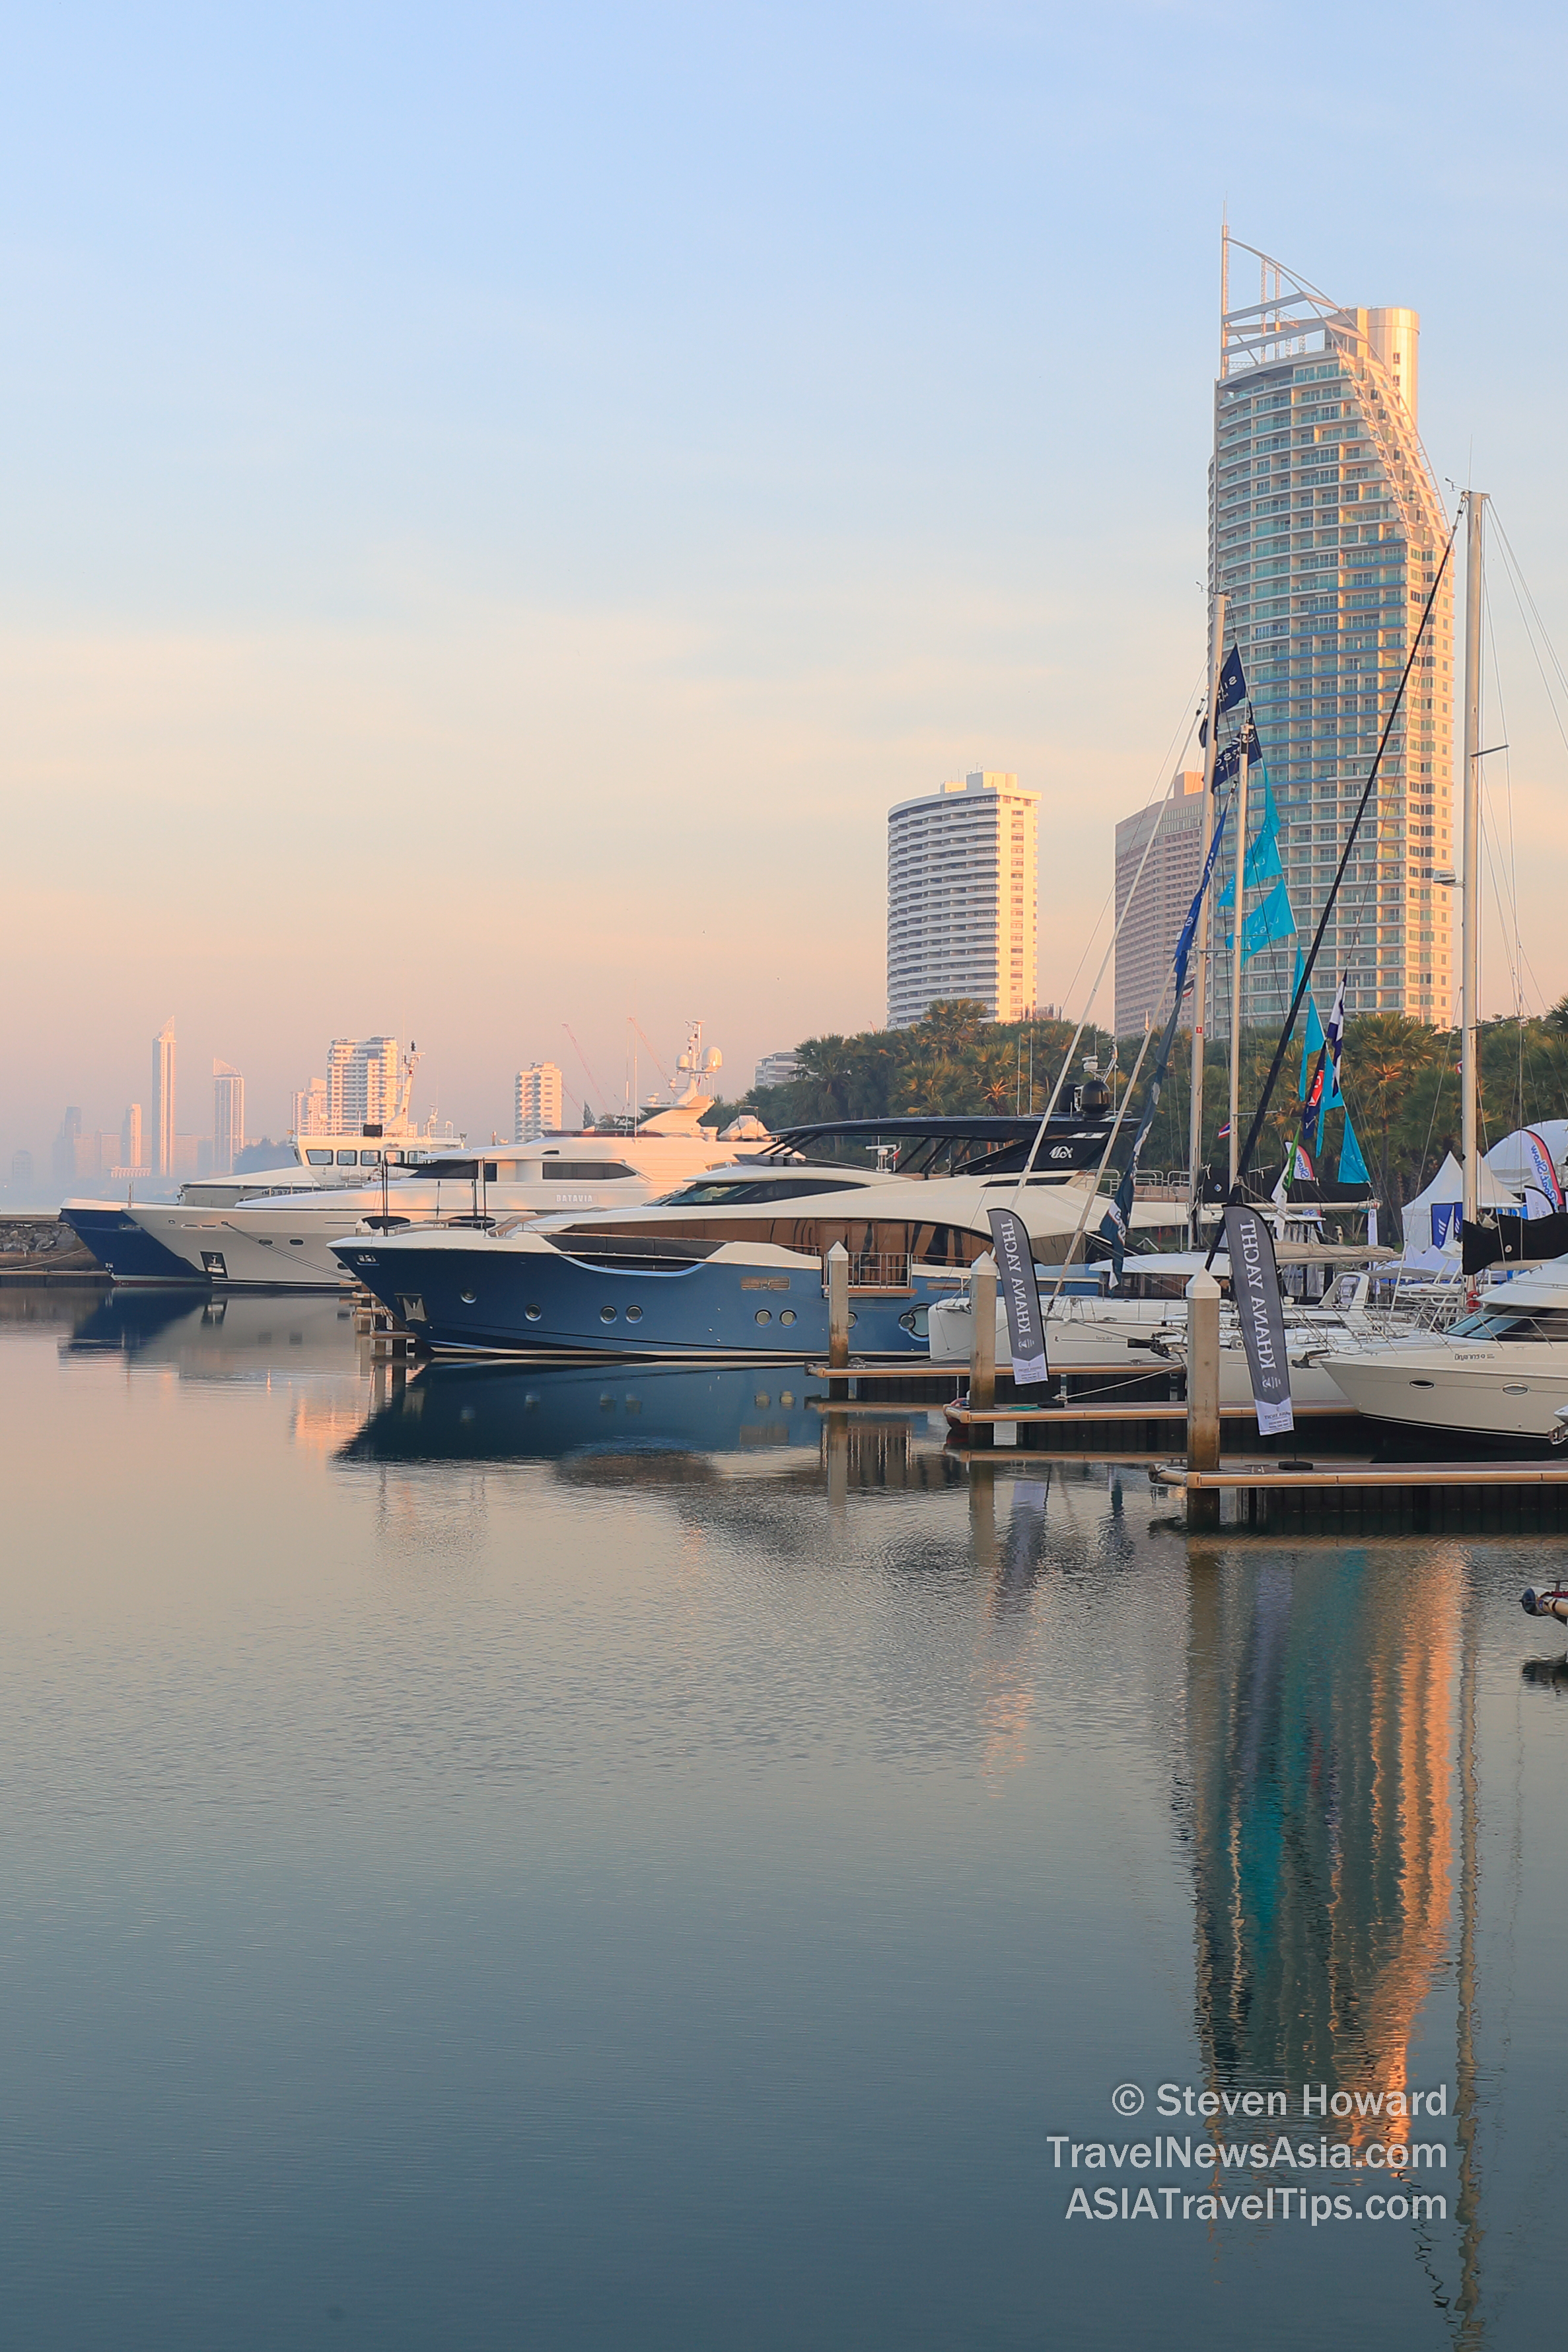 The eighth Ocean Marina Pattaya Boat Show will take place 21-24 November 2019. Picture by Steven Howard of TravelNewsAsia.com Click to enlarge.